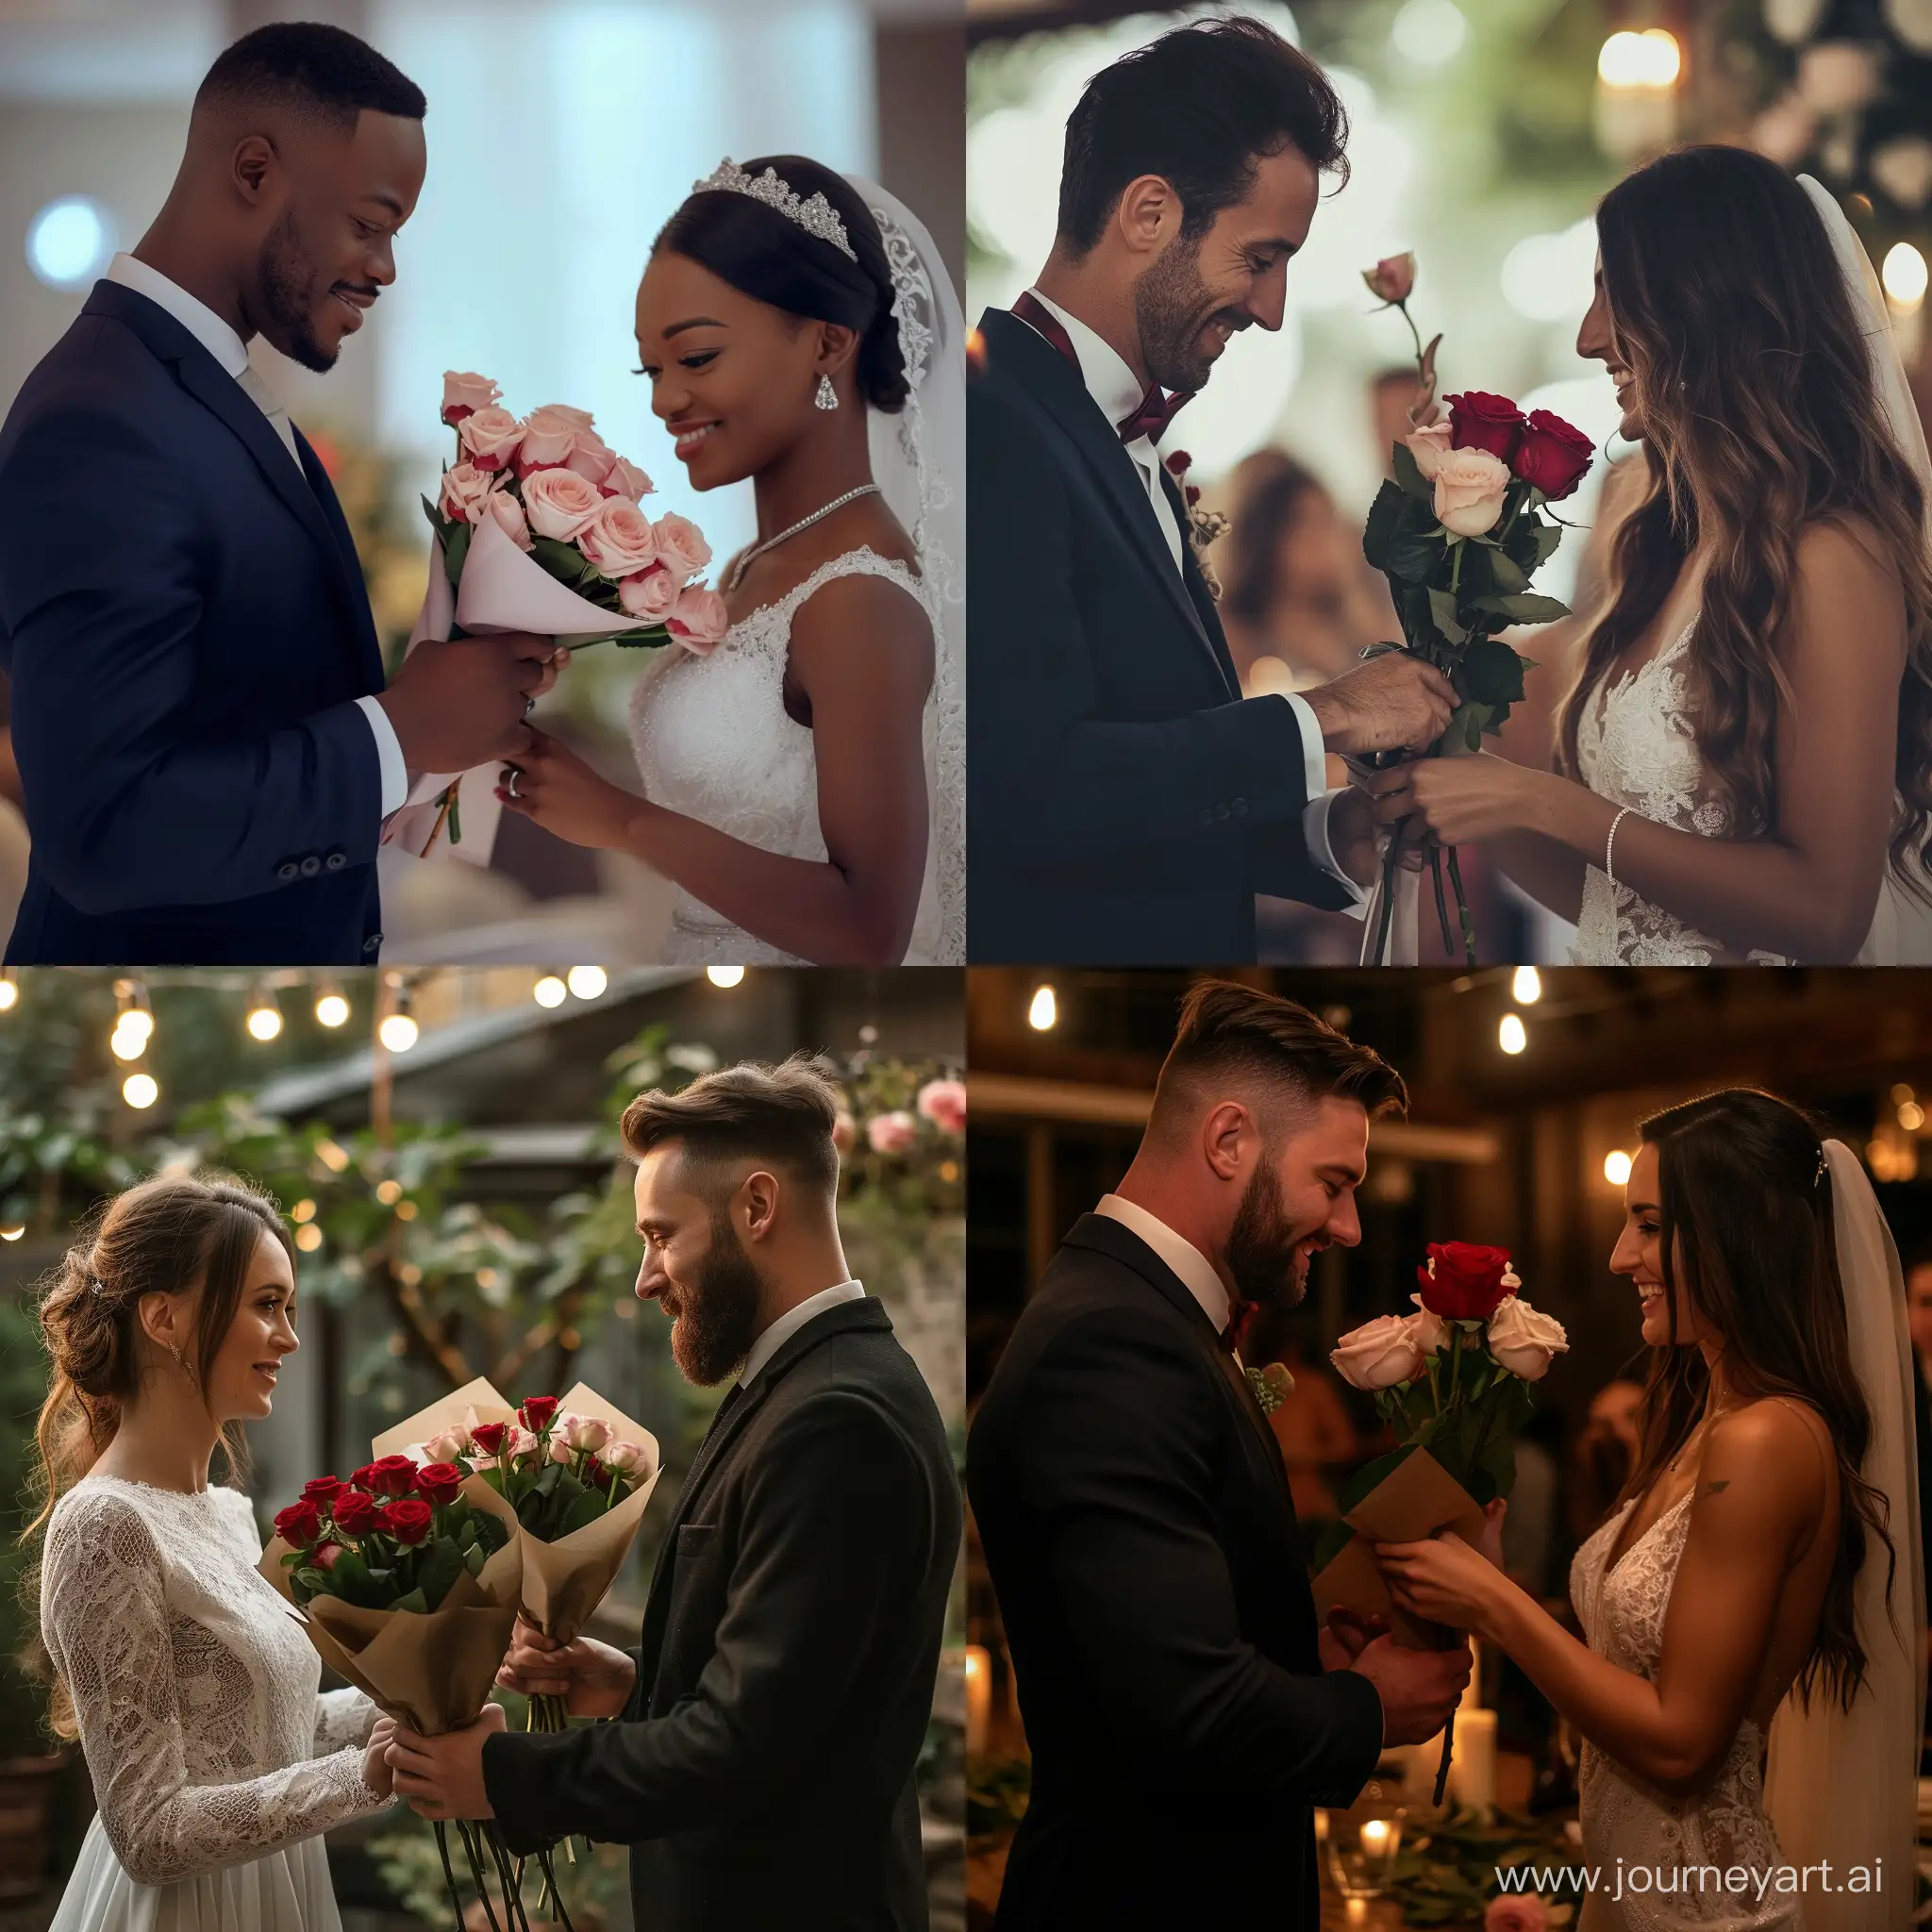 Romantic-Wedding-Moment-Husband-Presents-Roses-to-Wife